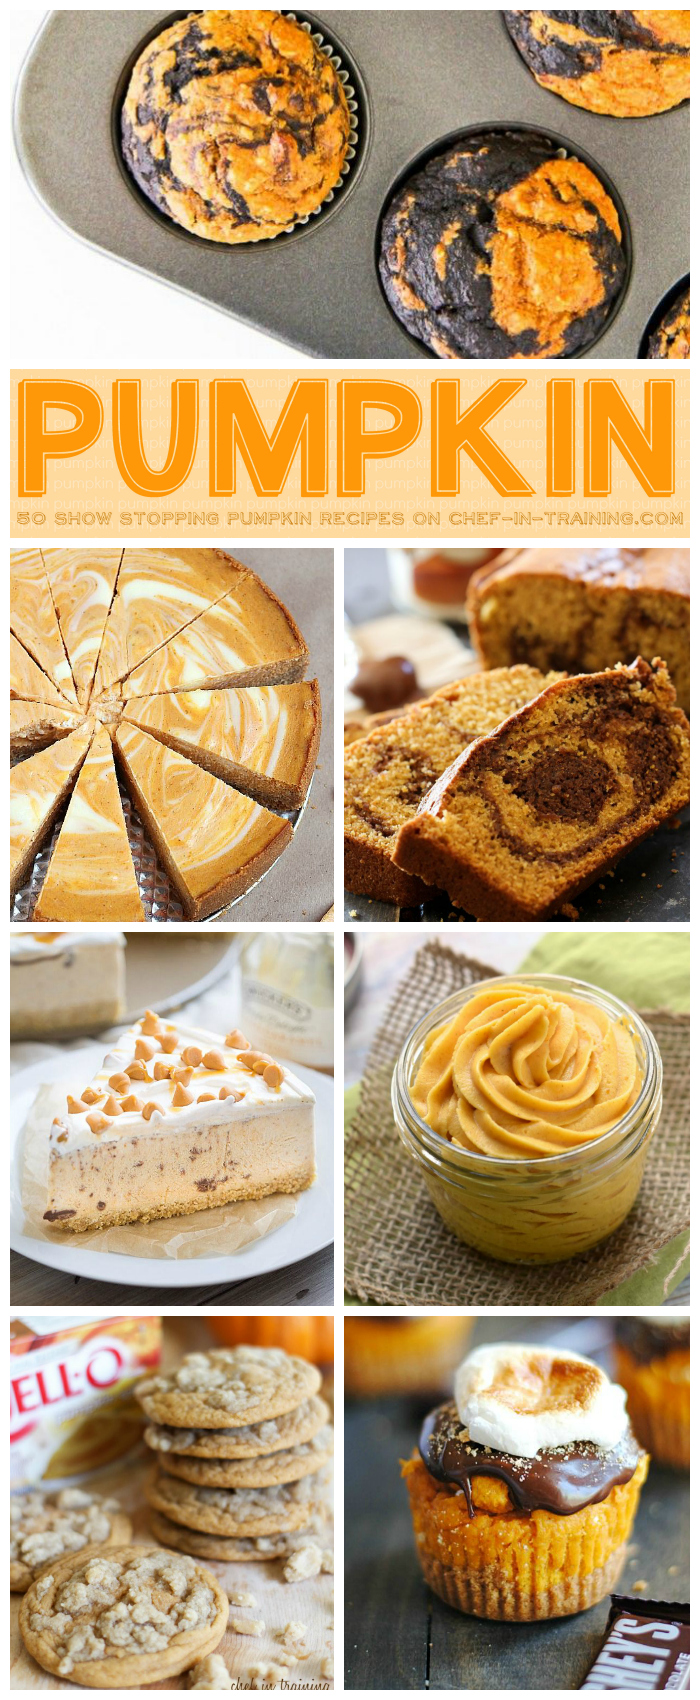 50 Show Stopping Pumpkin Recipes on chef-in-training.com …SO many great and yummy pumpkin recipes to choose from for fall!